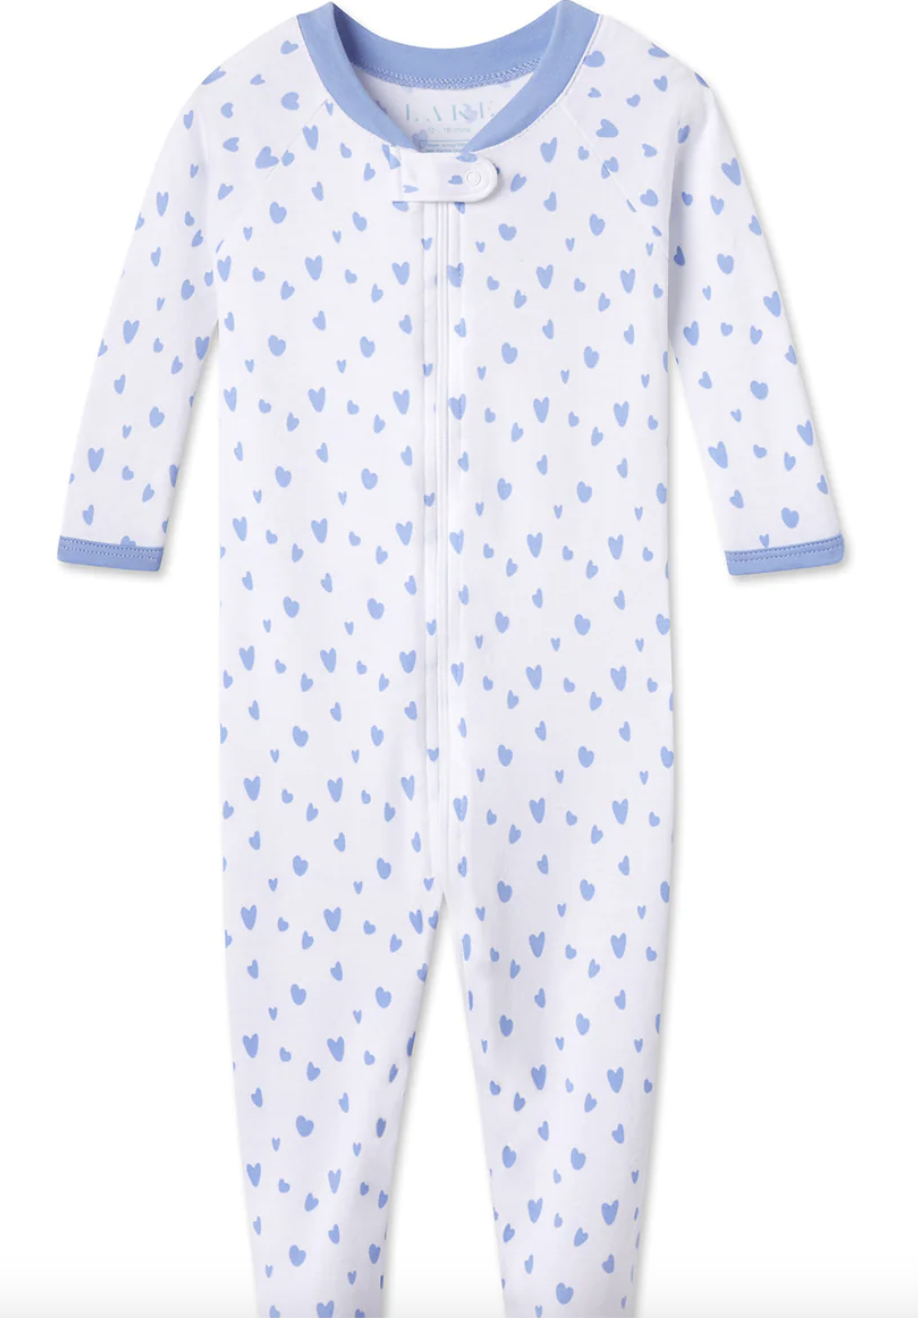 hearts onesie for boys or girls